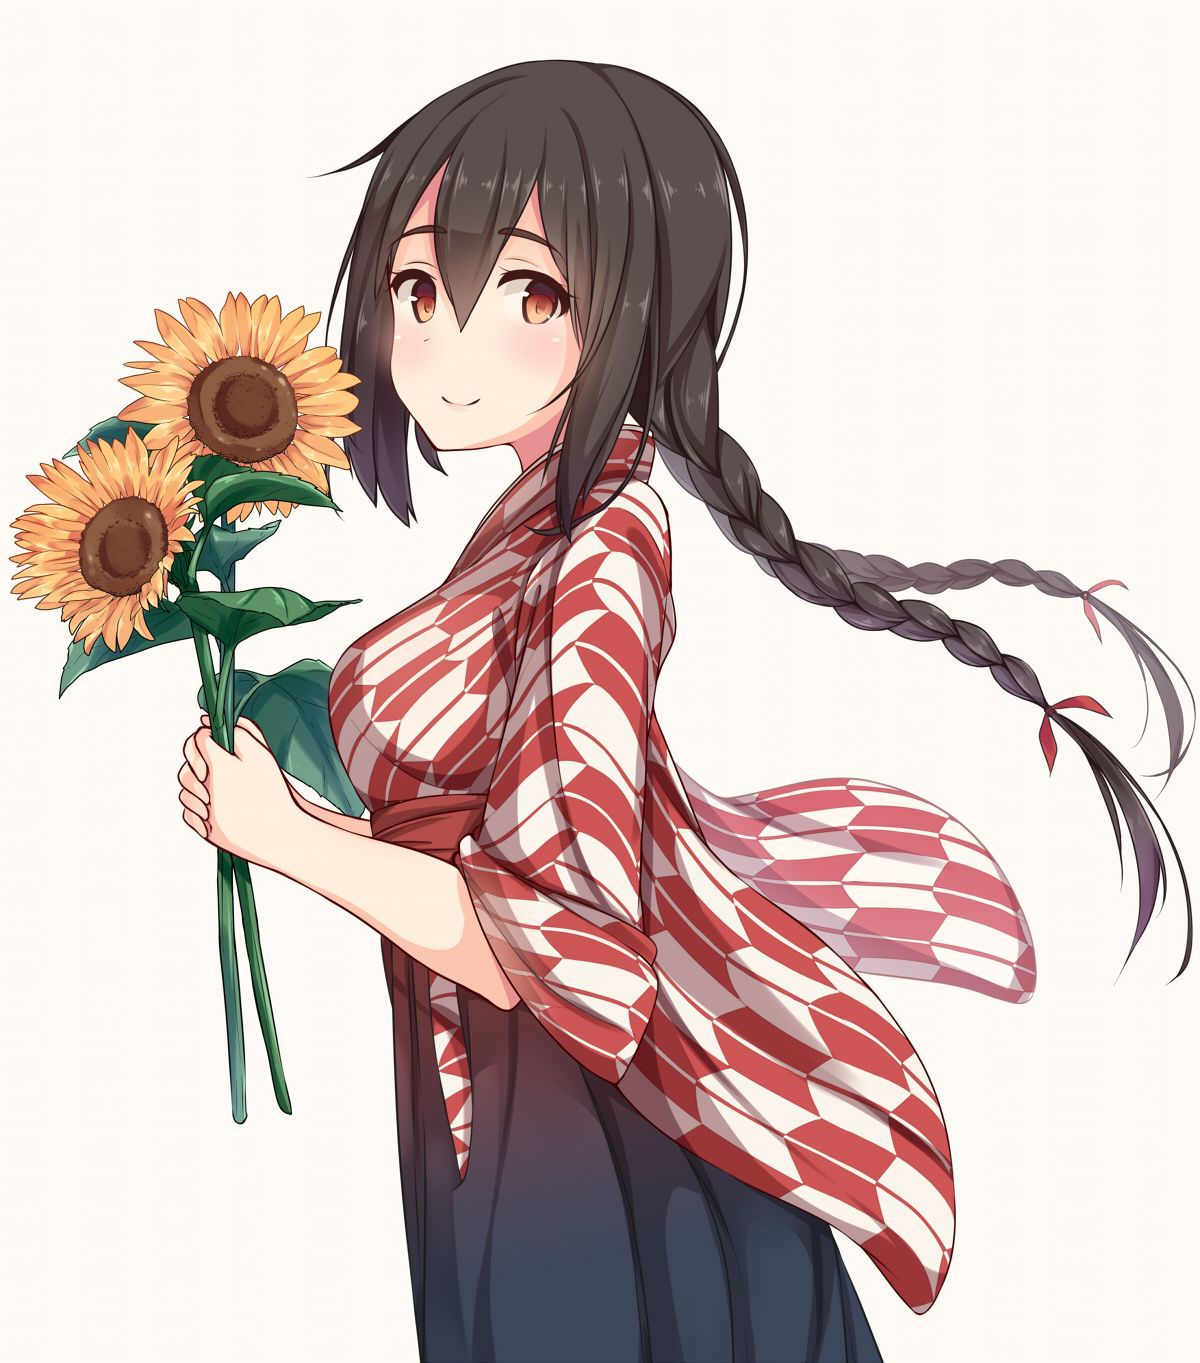 [Secondary, ZIP] summer 2: girl with a sunflower or image summary 26